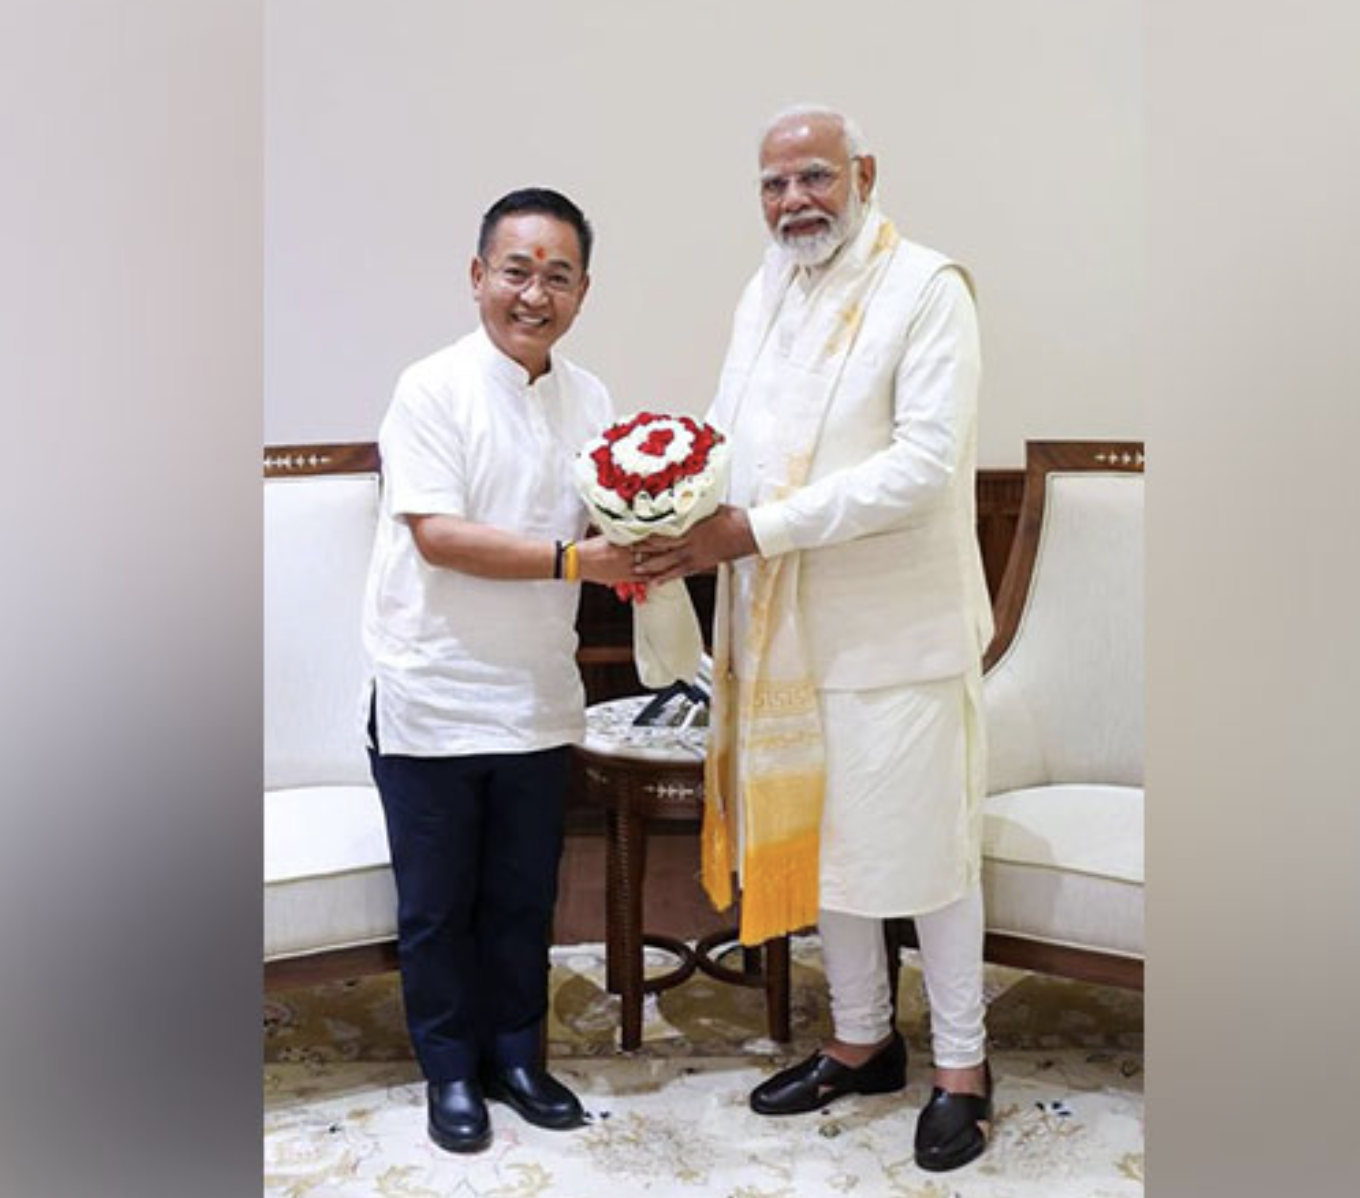 sikkim-cm-meets-pm-modi-urges-inr-367325-cr-from-centre-for-post-flood-reconstruction